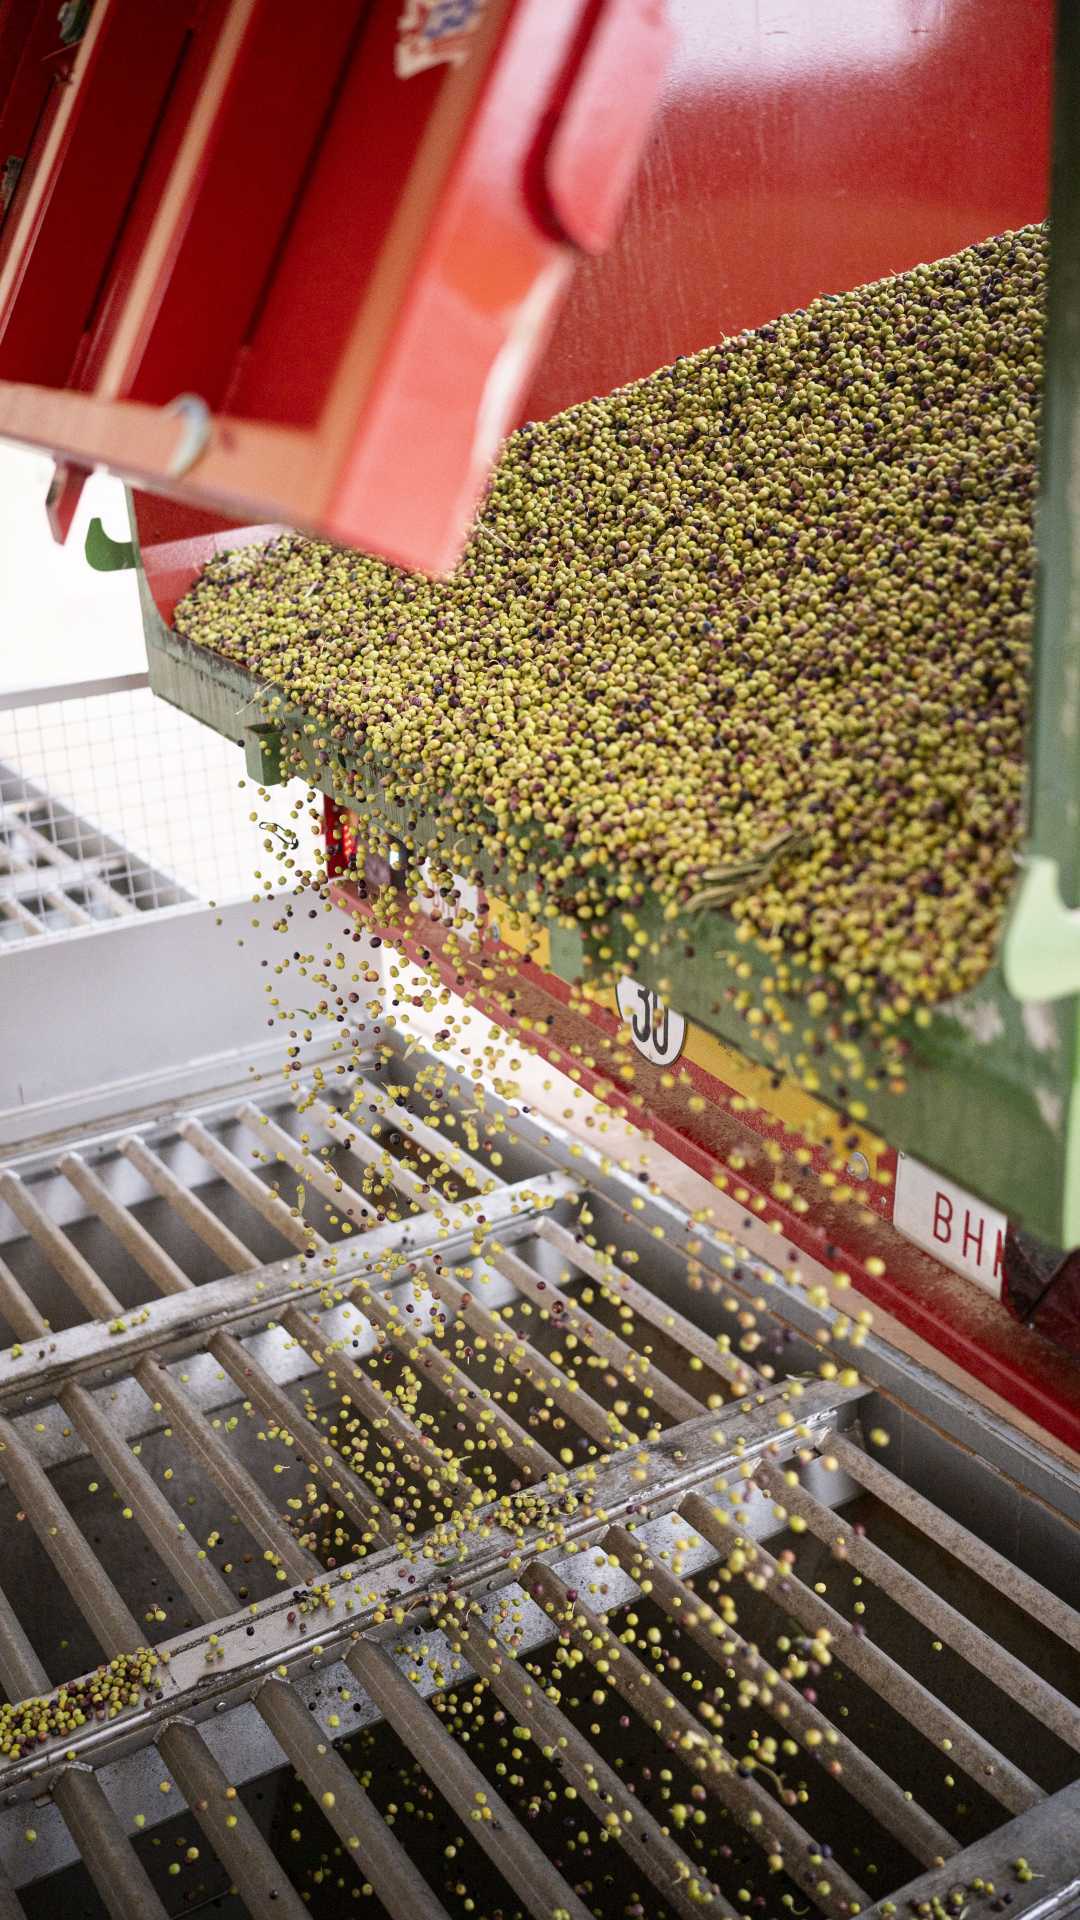 Thousands of olive being poured through grates before the oil extraction process